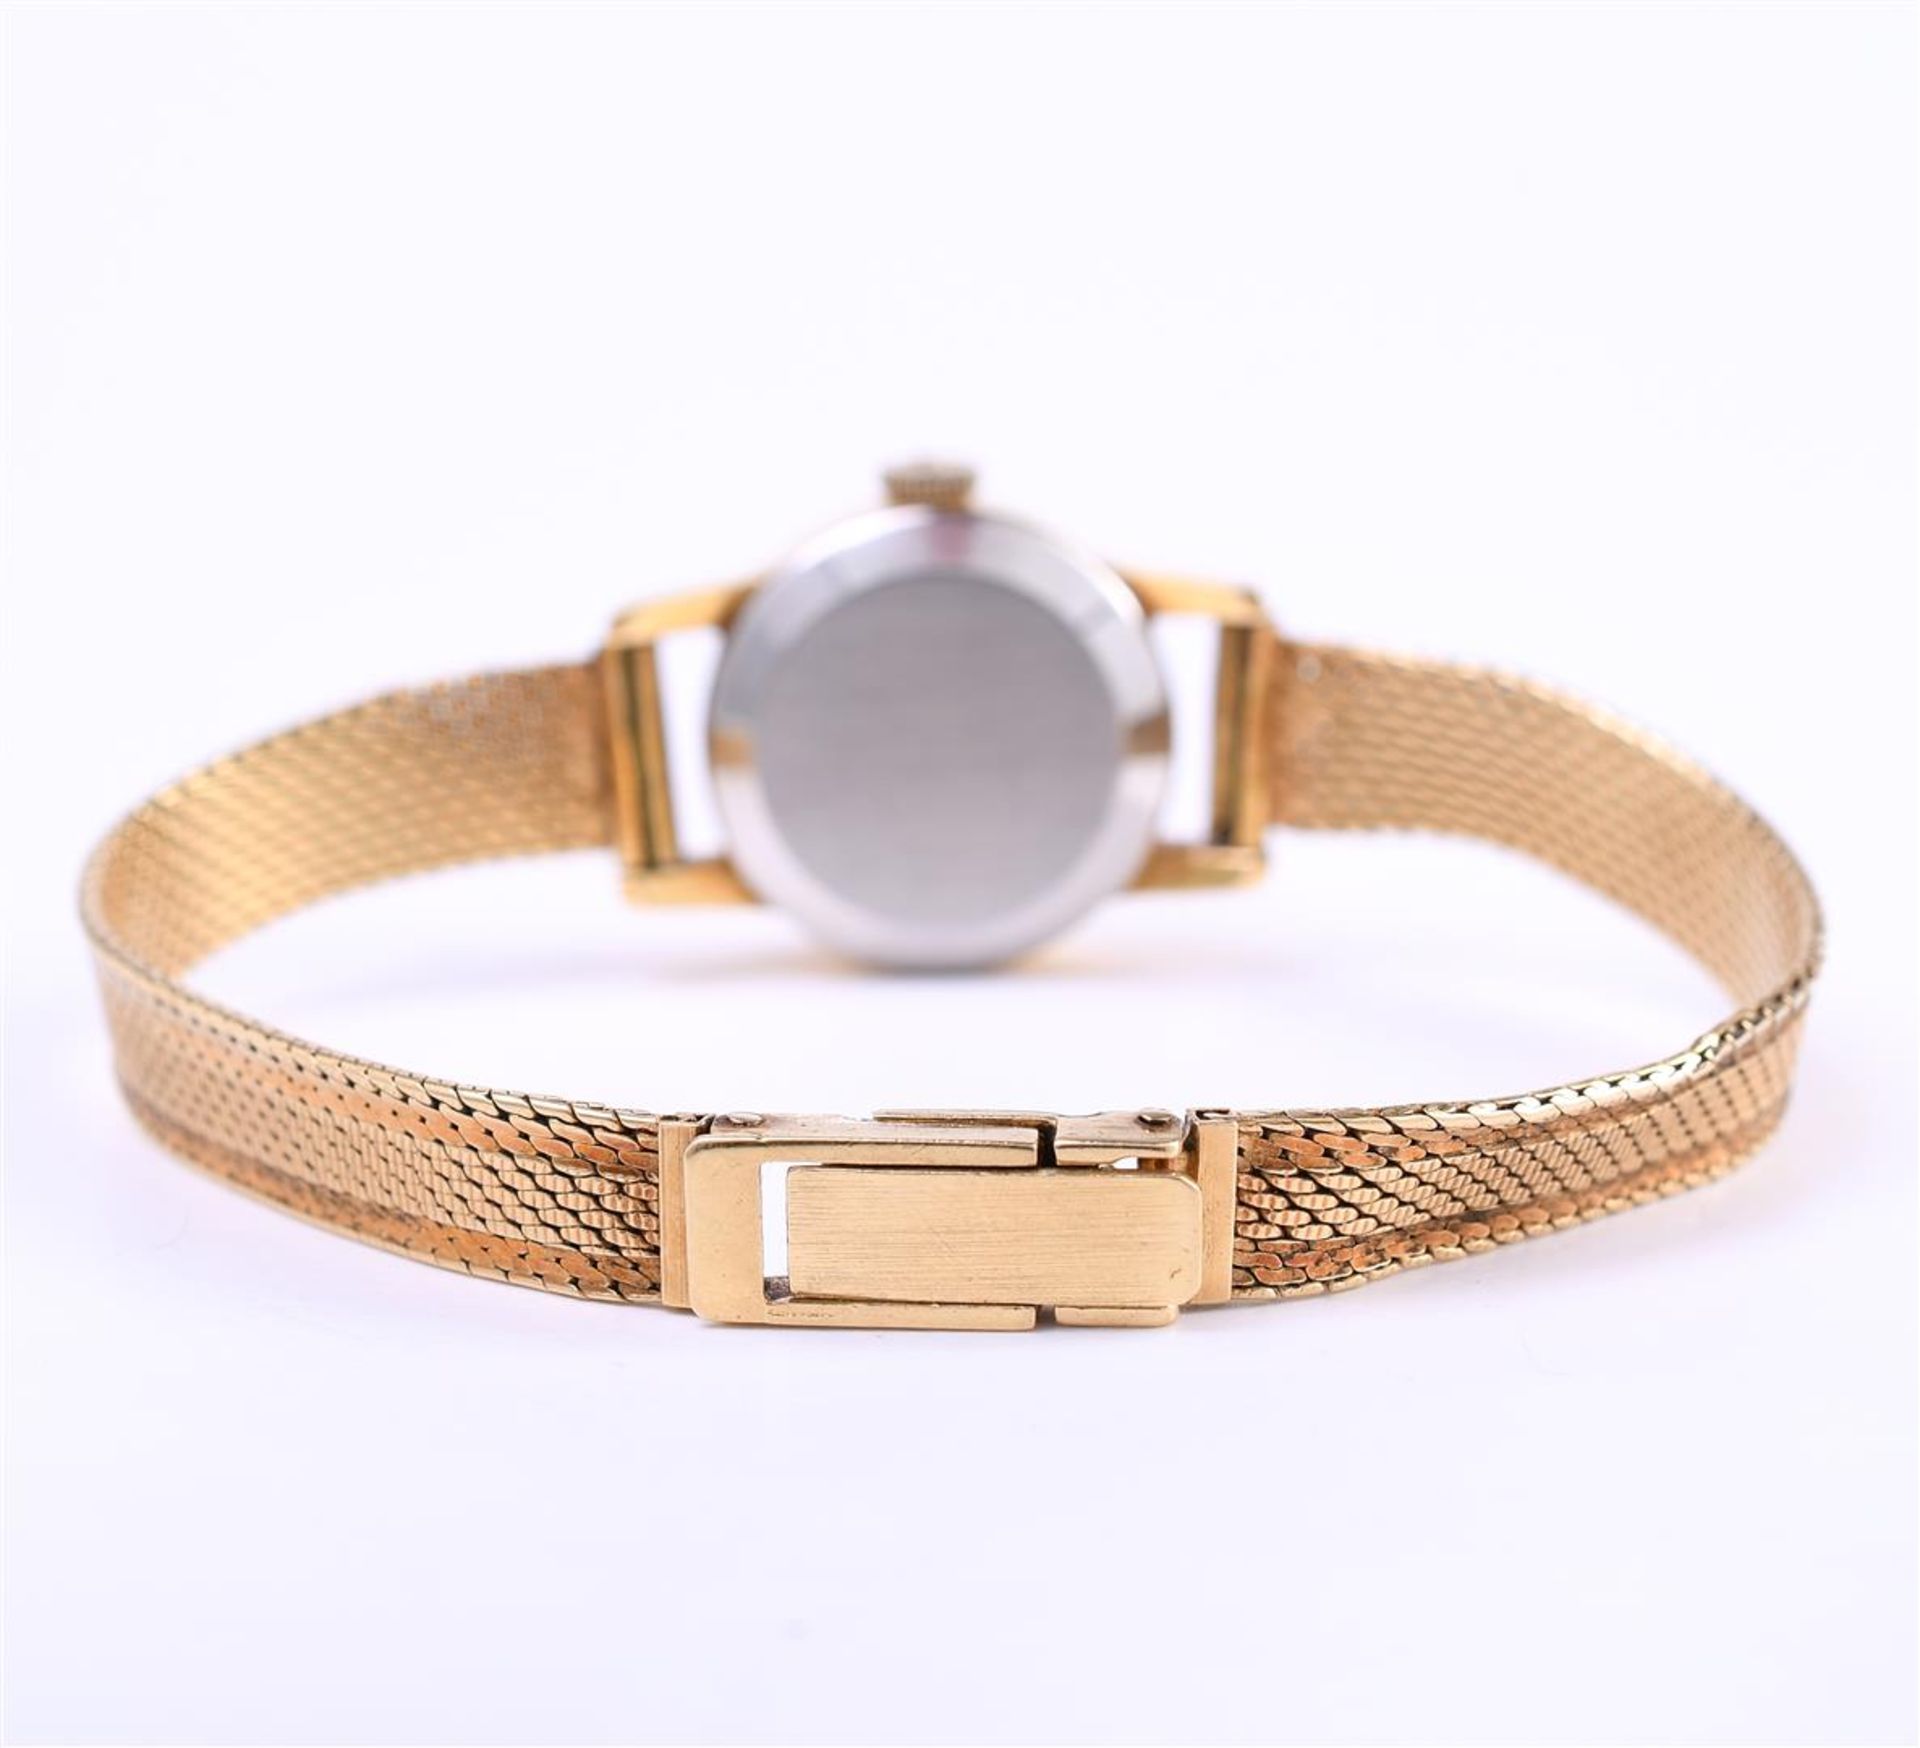 14 kt yellow gold Omega wind-up ladies watch with Milanese strap - Image 5 of 6